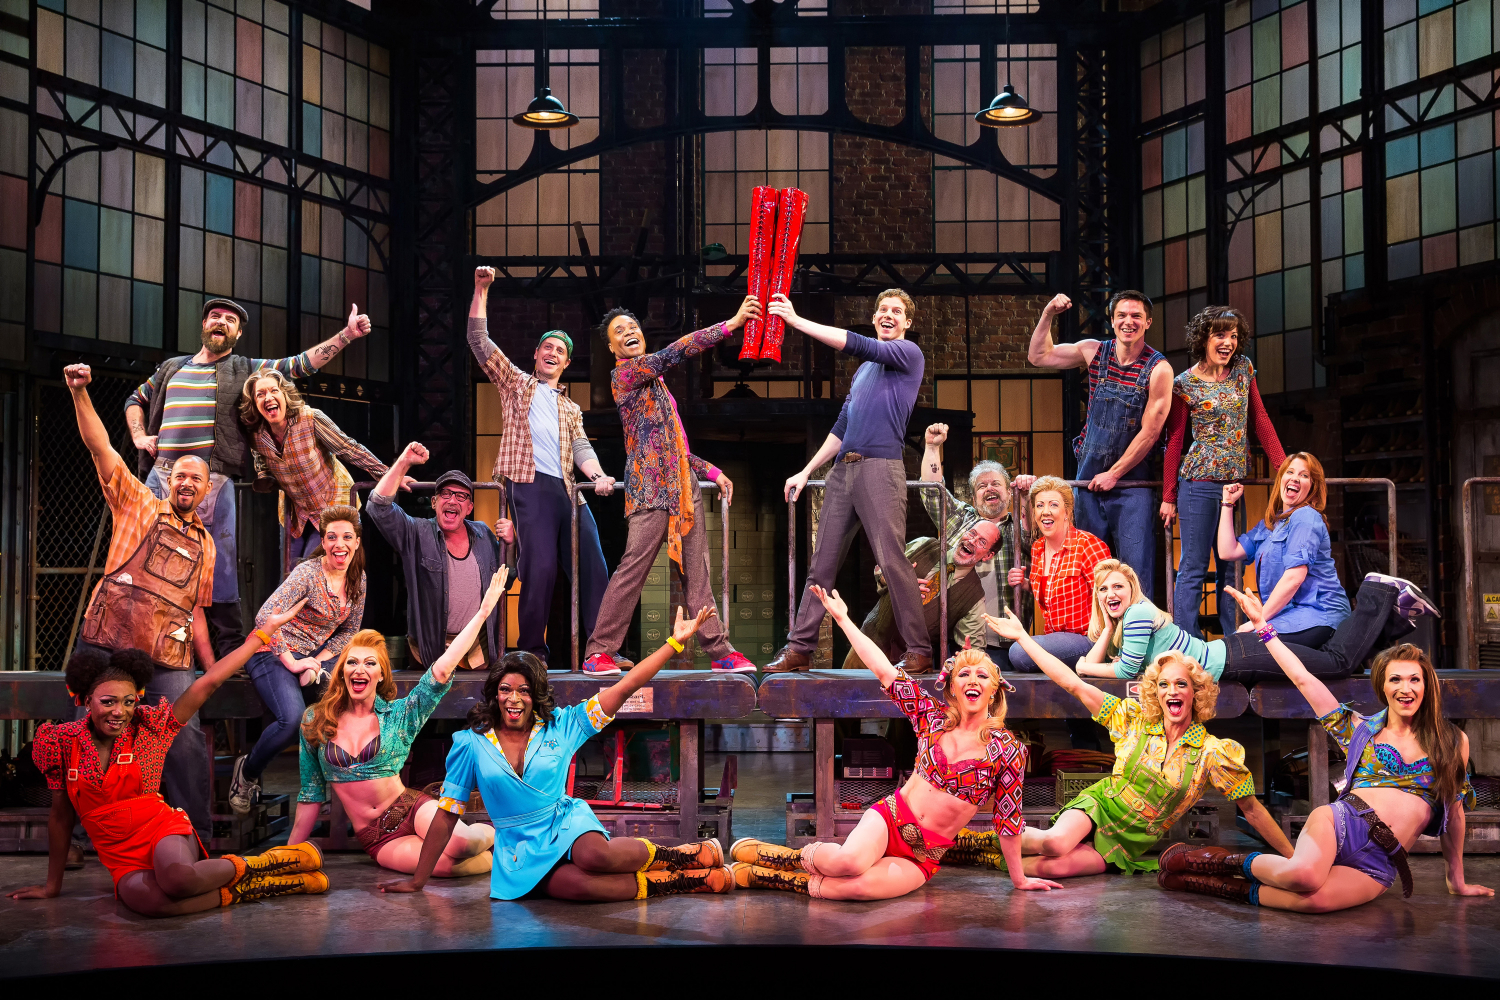 kinky-boots-broadway-71-email-1.jpg